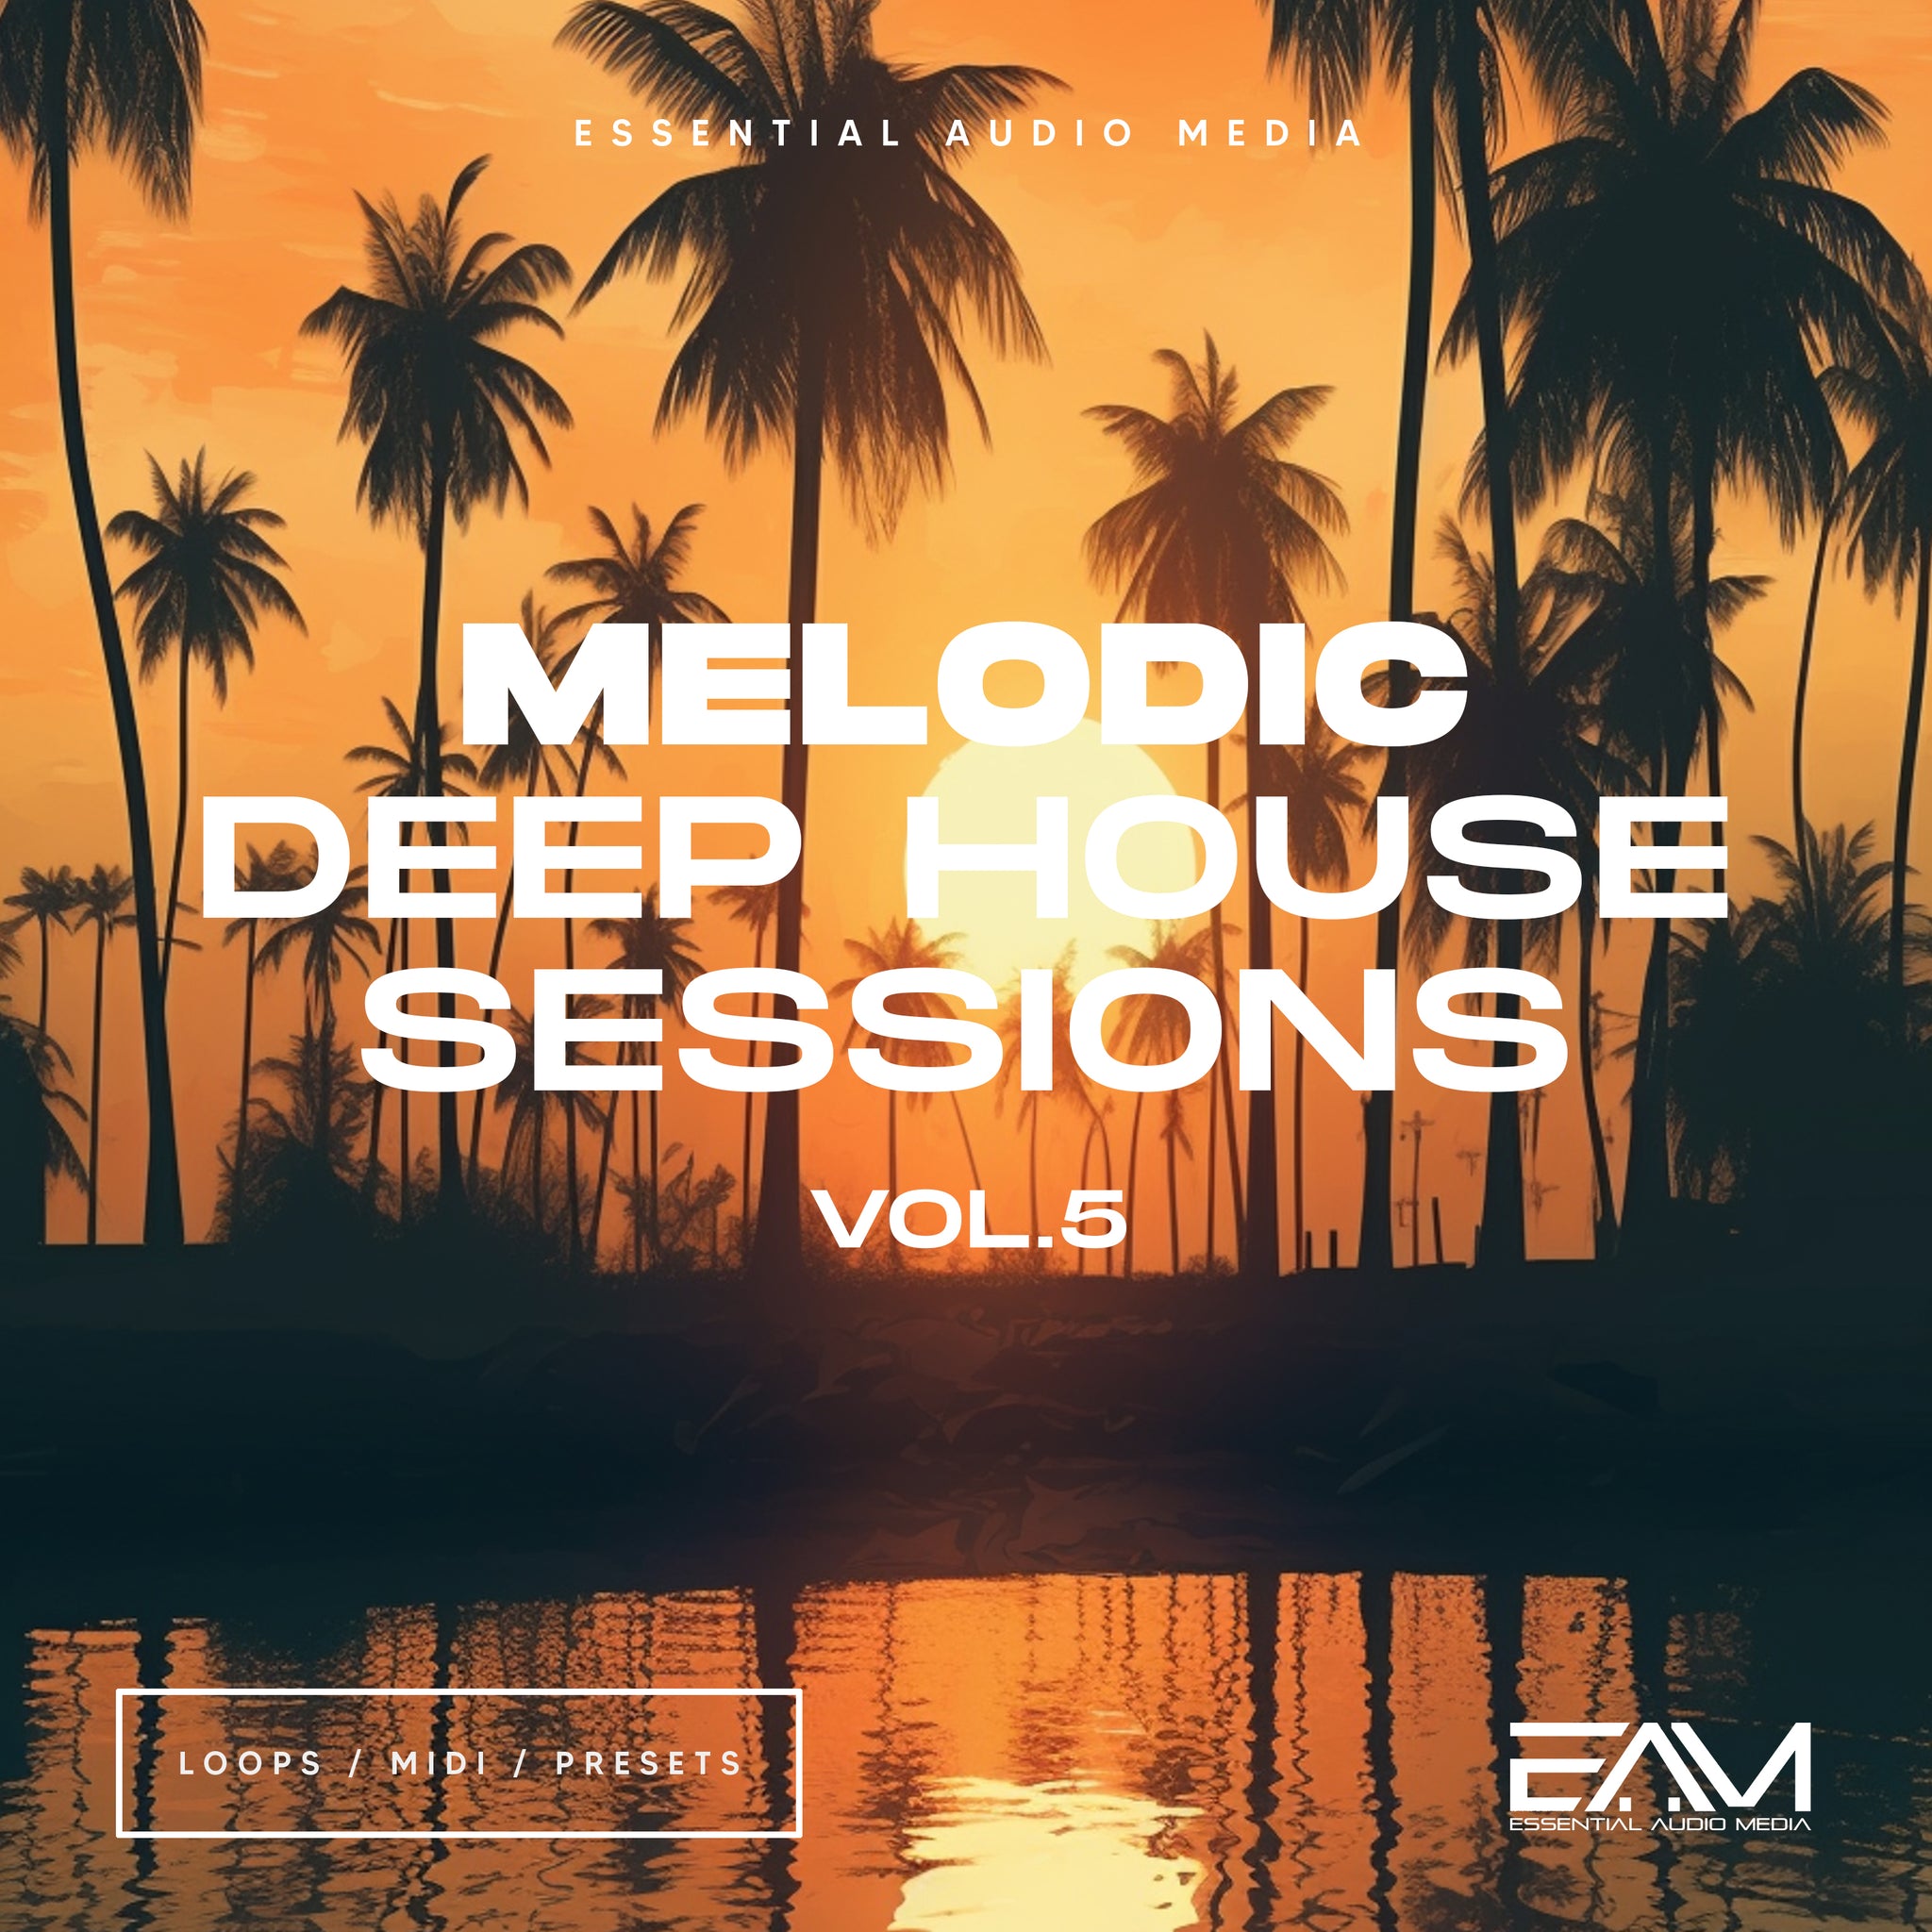 Melodic Deep House Sessions Vol.5